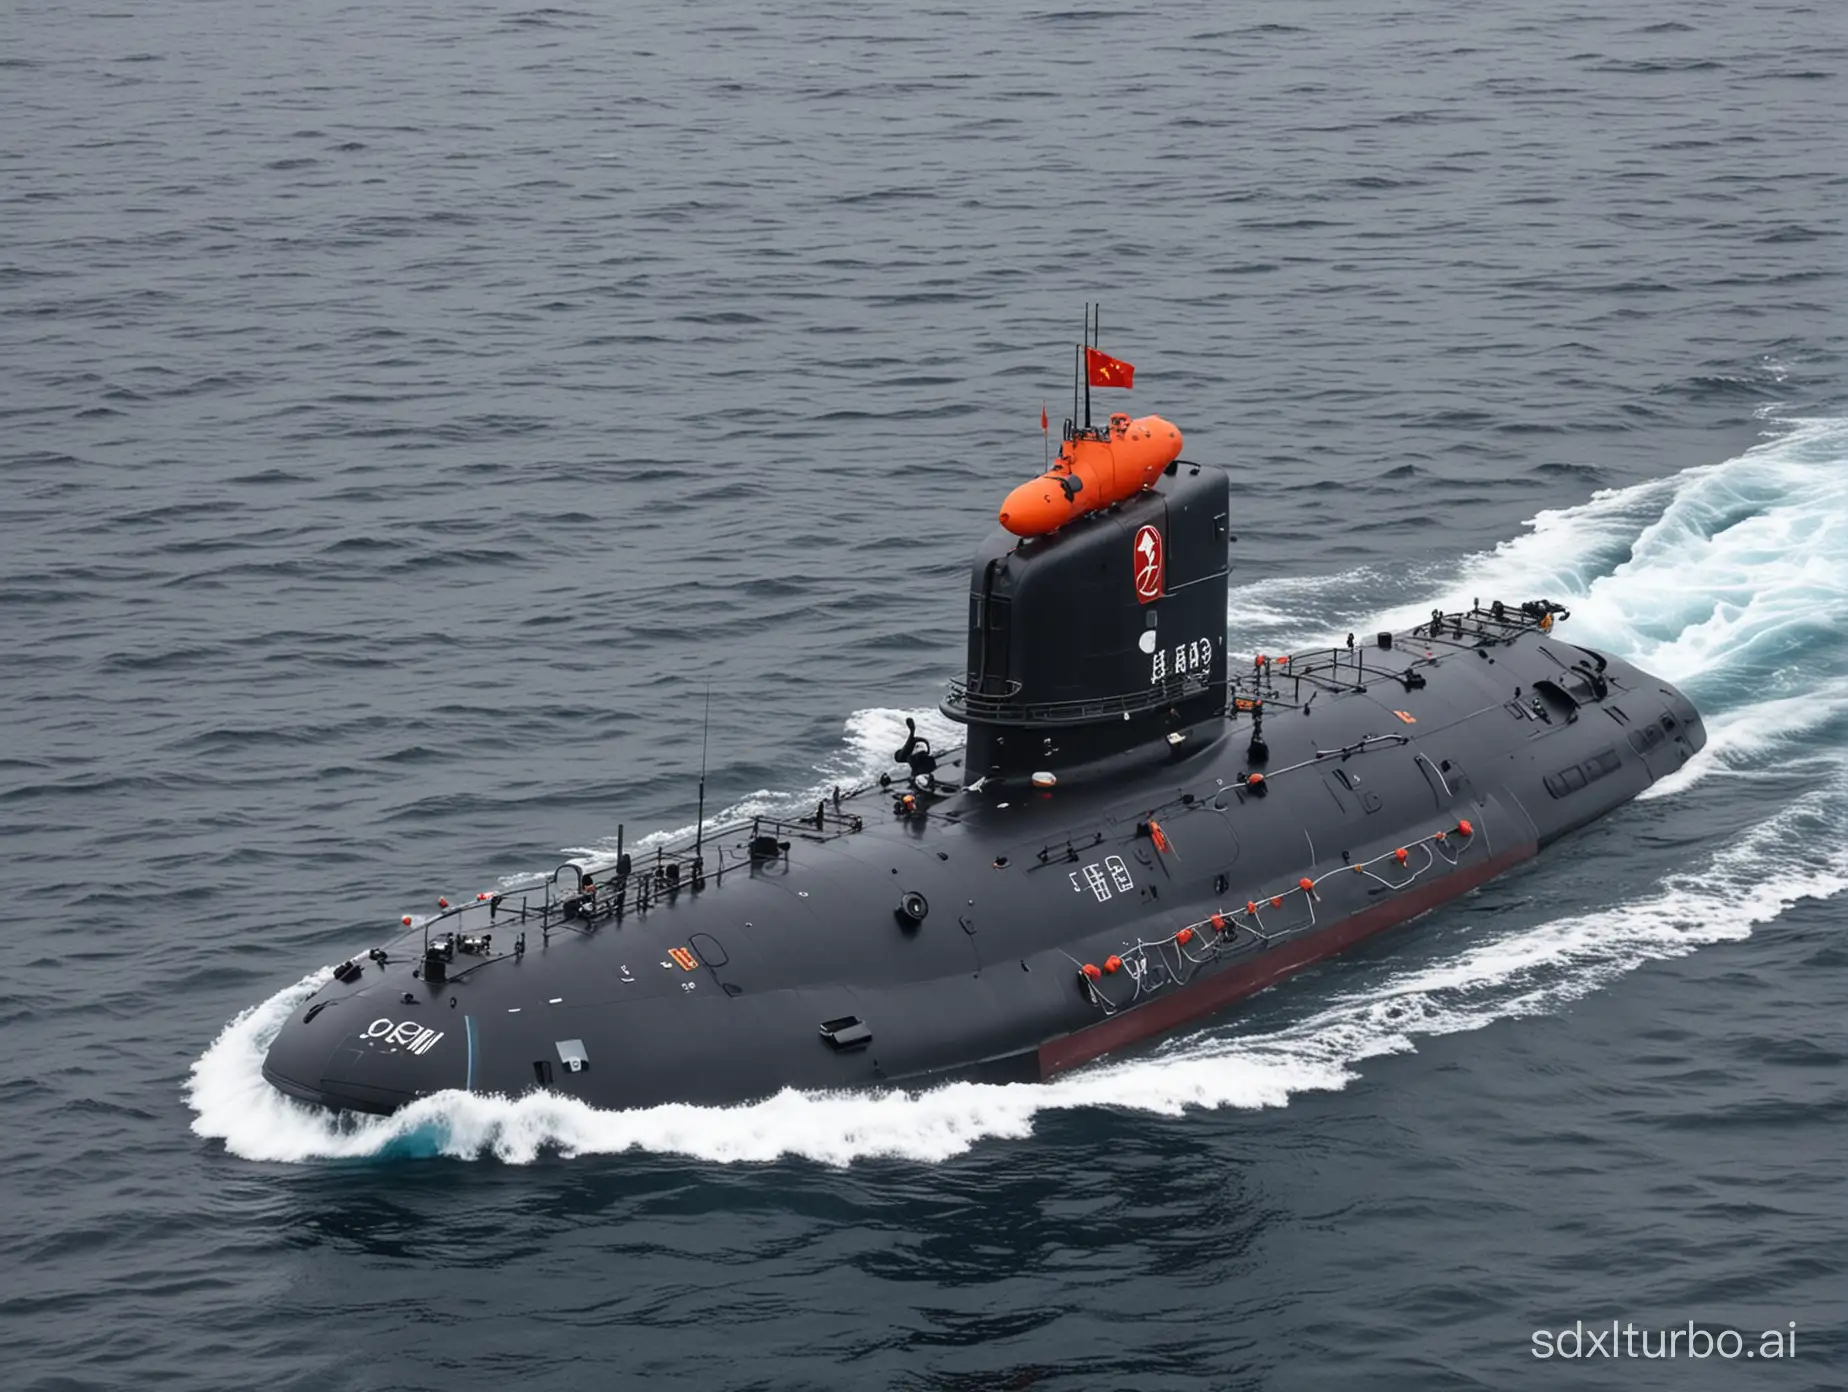 Chinese Jiaolong manned submersible